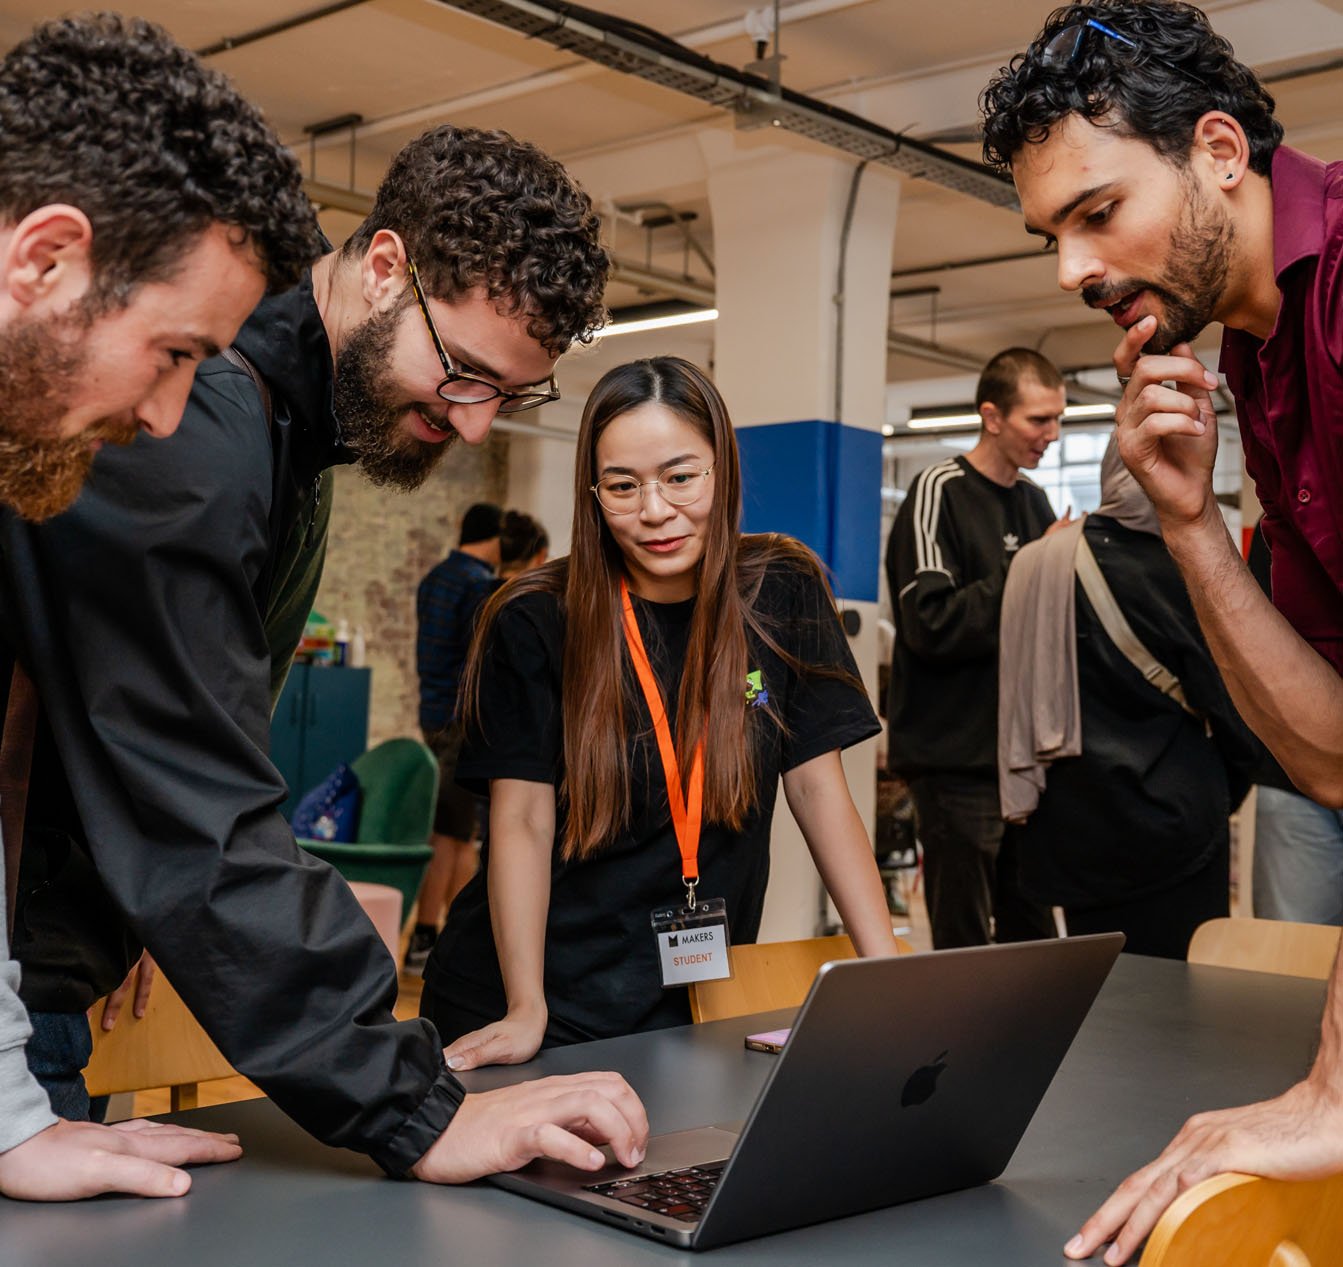 3 men with dark curly hair and beards work on a laptop with female student with long hair and an orange langyard